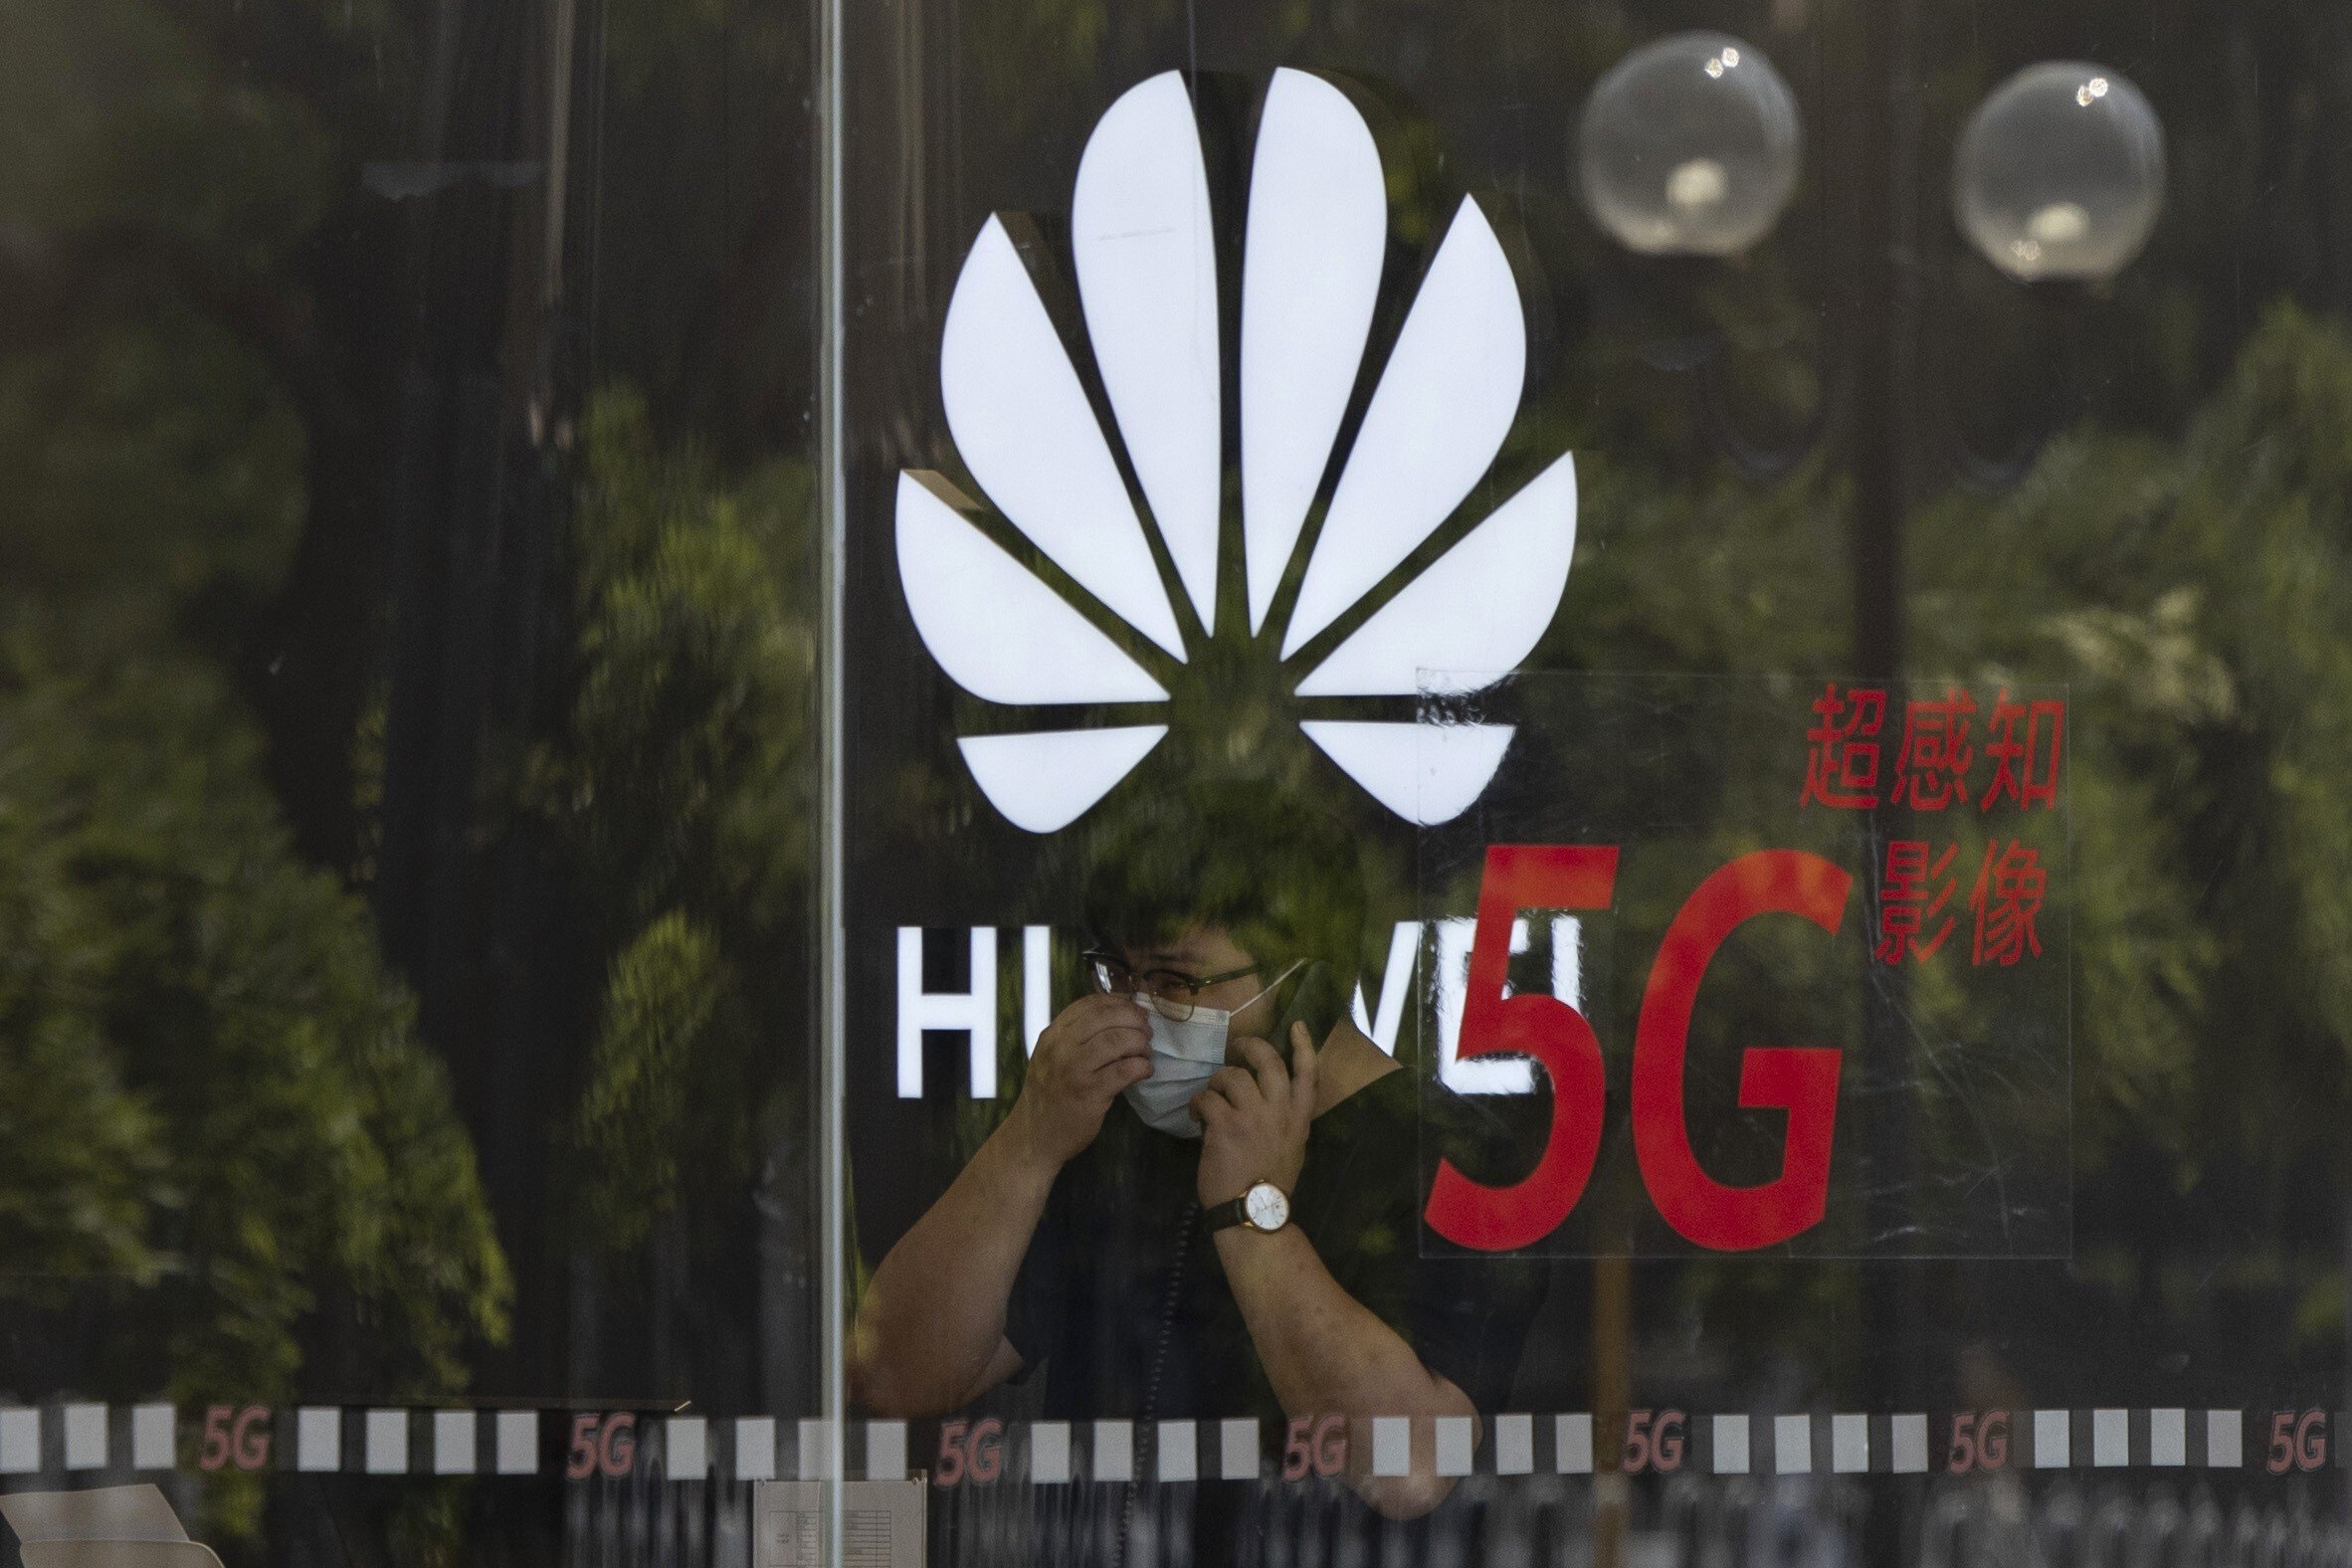 Huawei said that its digital technology has helped more than 170 countries and regions generate 325 billion kWh of electricity from renewable sources to date. Photo: AP Photo